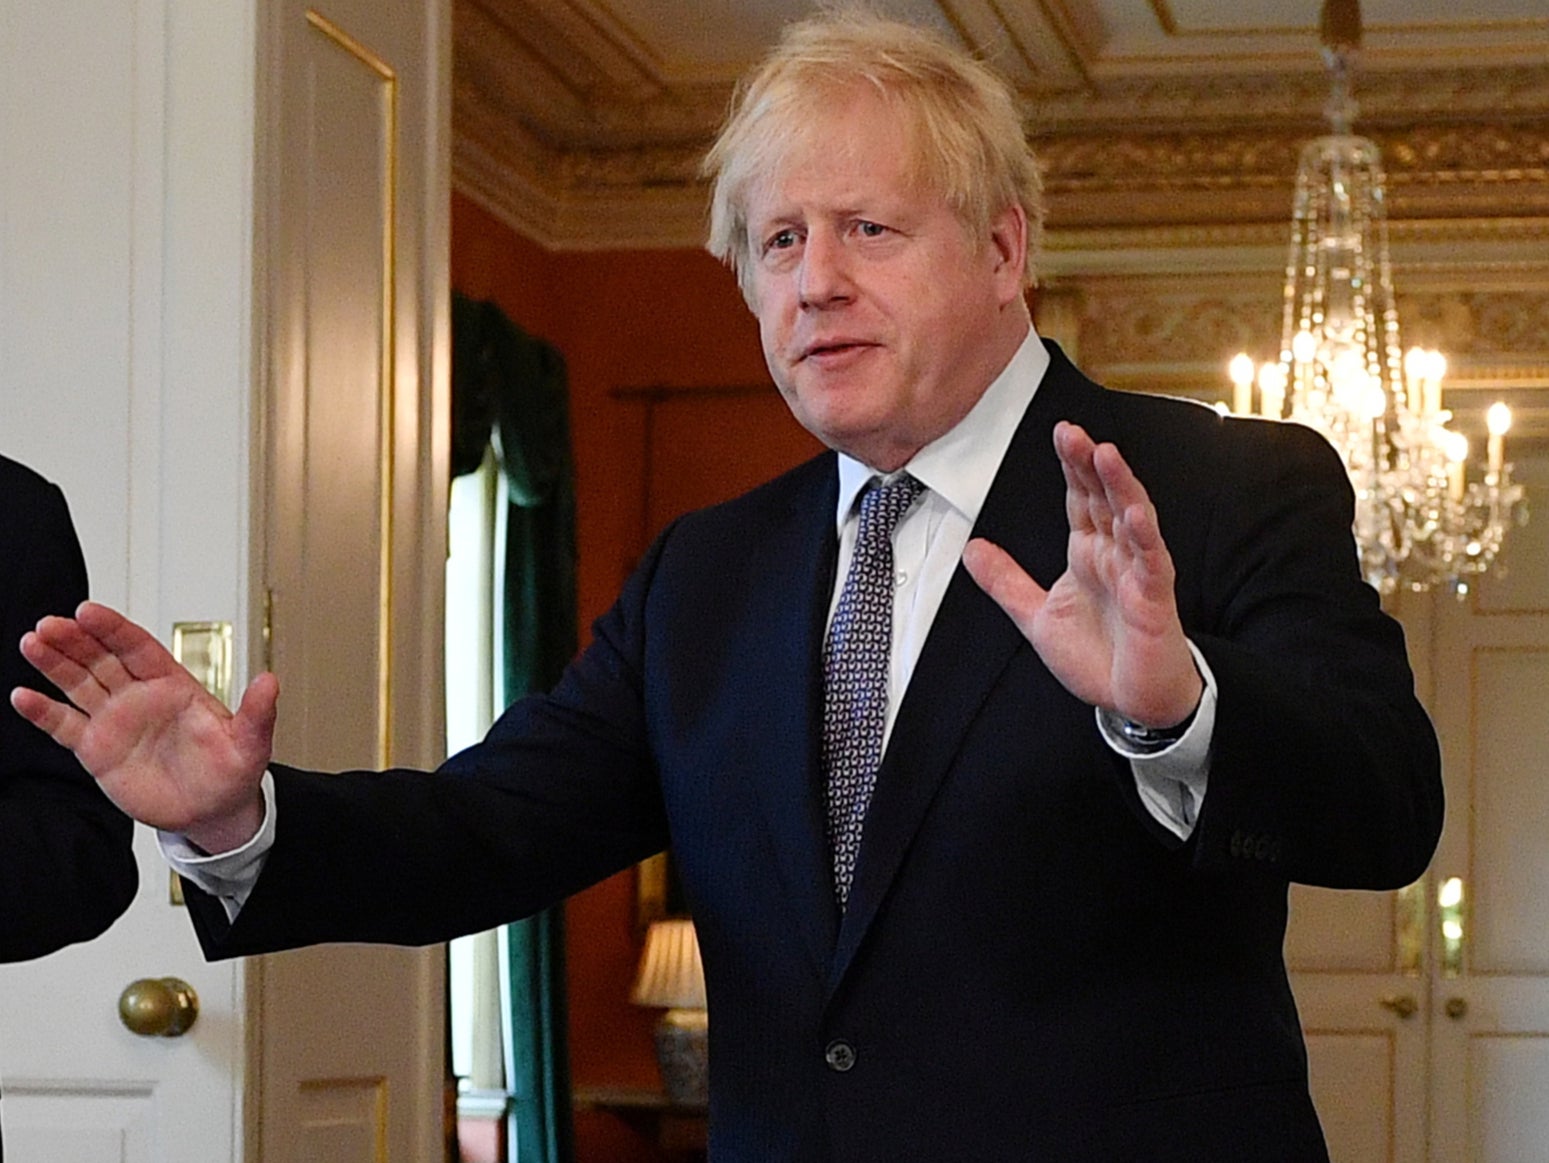 Public opinion will support Boris Johnson if he delays the lifting of some restrictions, a poll for The Independent finds